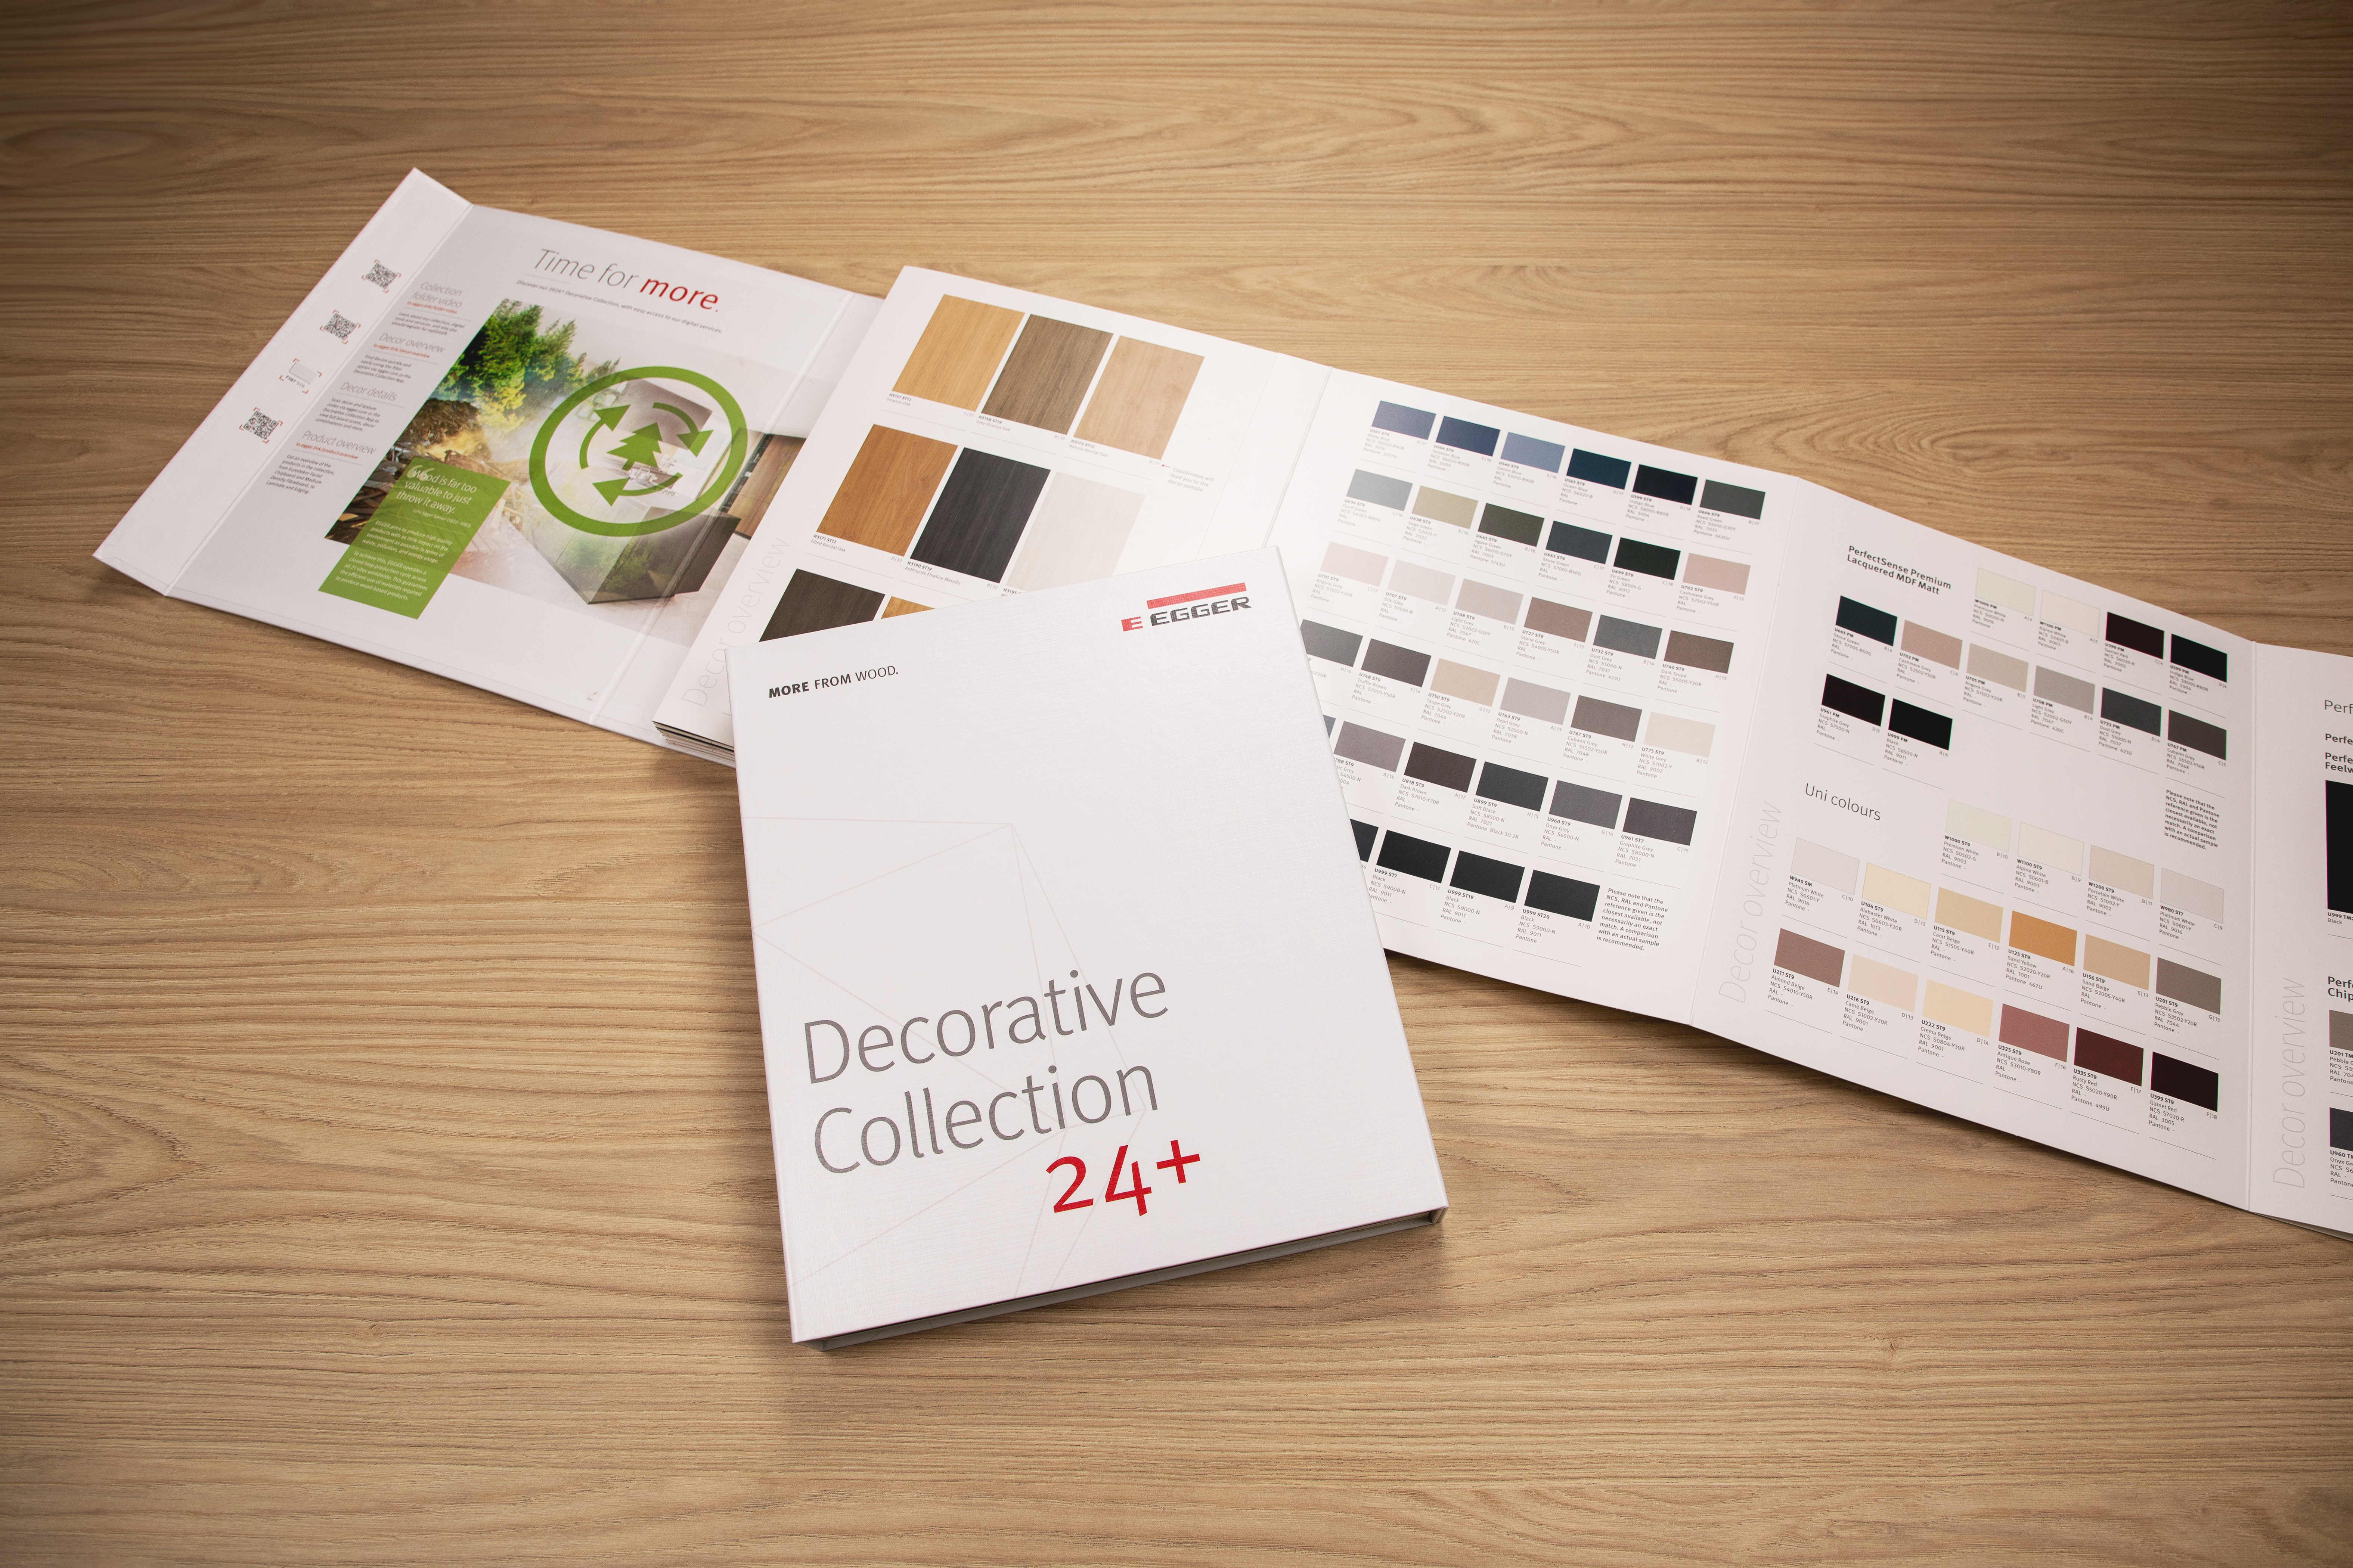 Decorative Collection 24+